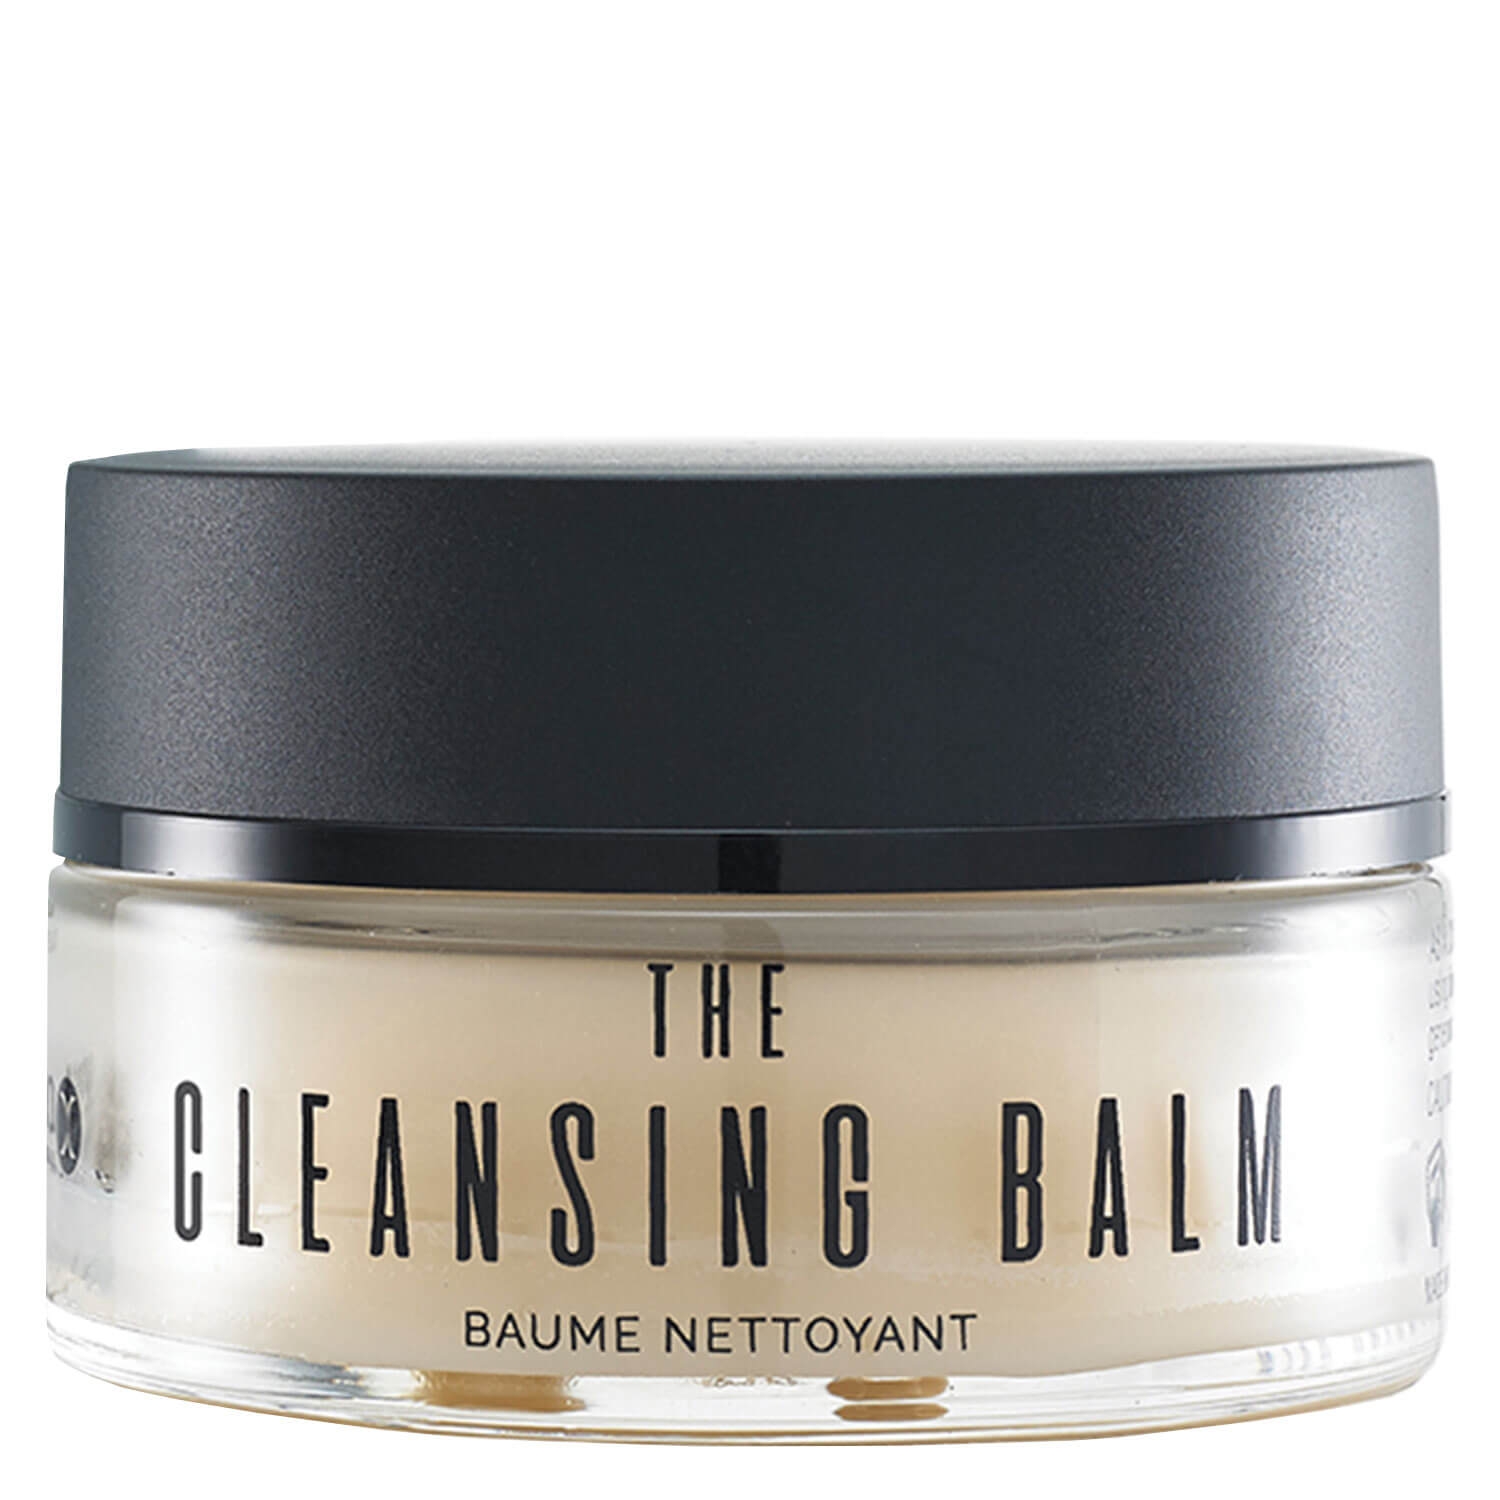 Product image from sienna x - The Cleansing Balm